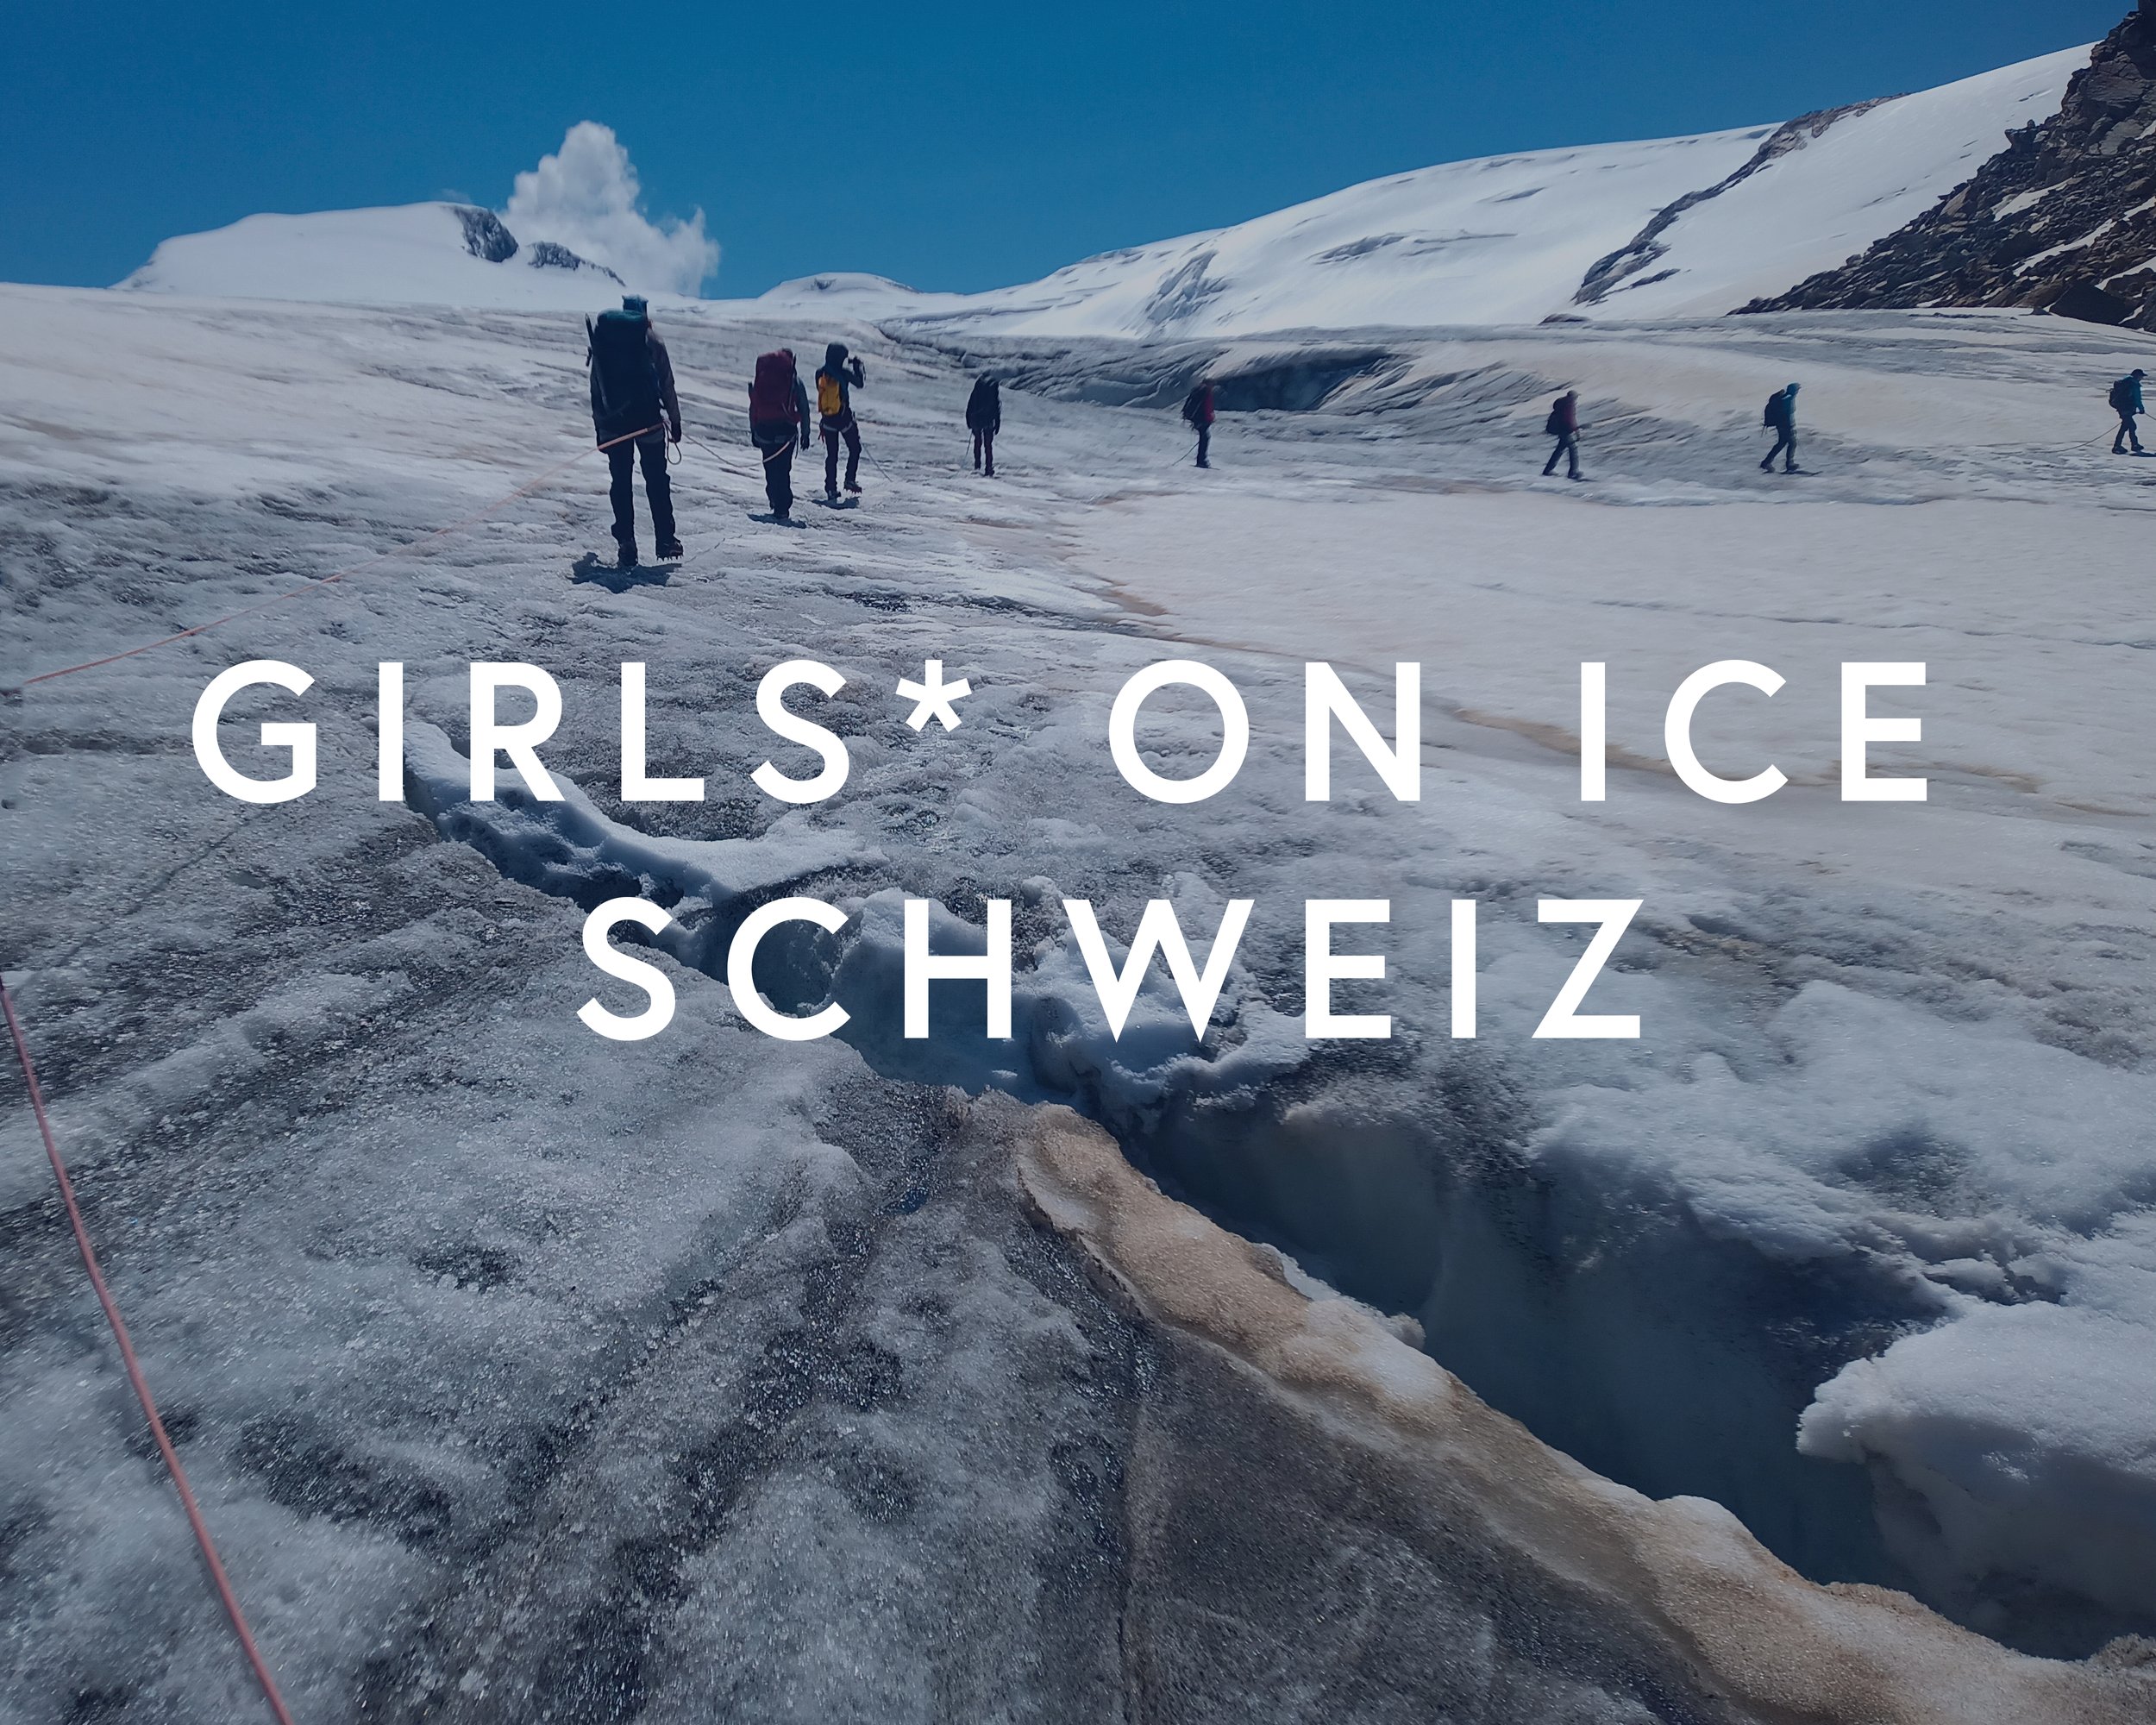 Image links to the Girls* on ice schewiz expedition info page